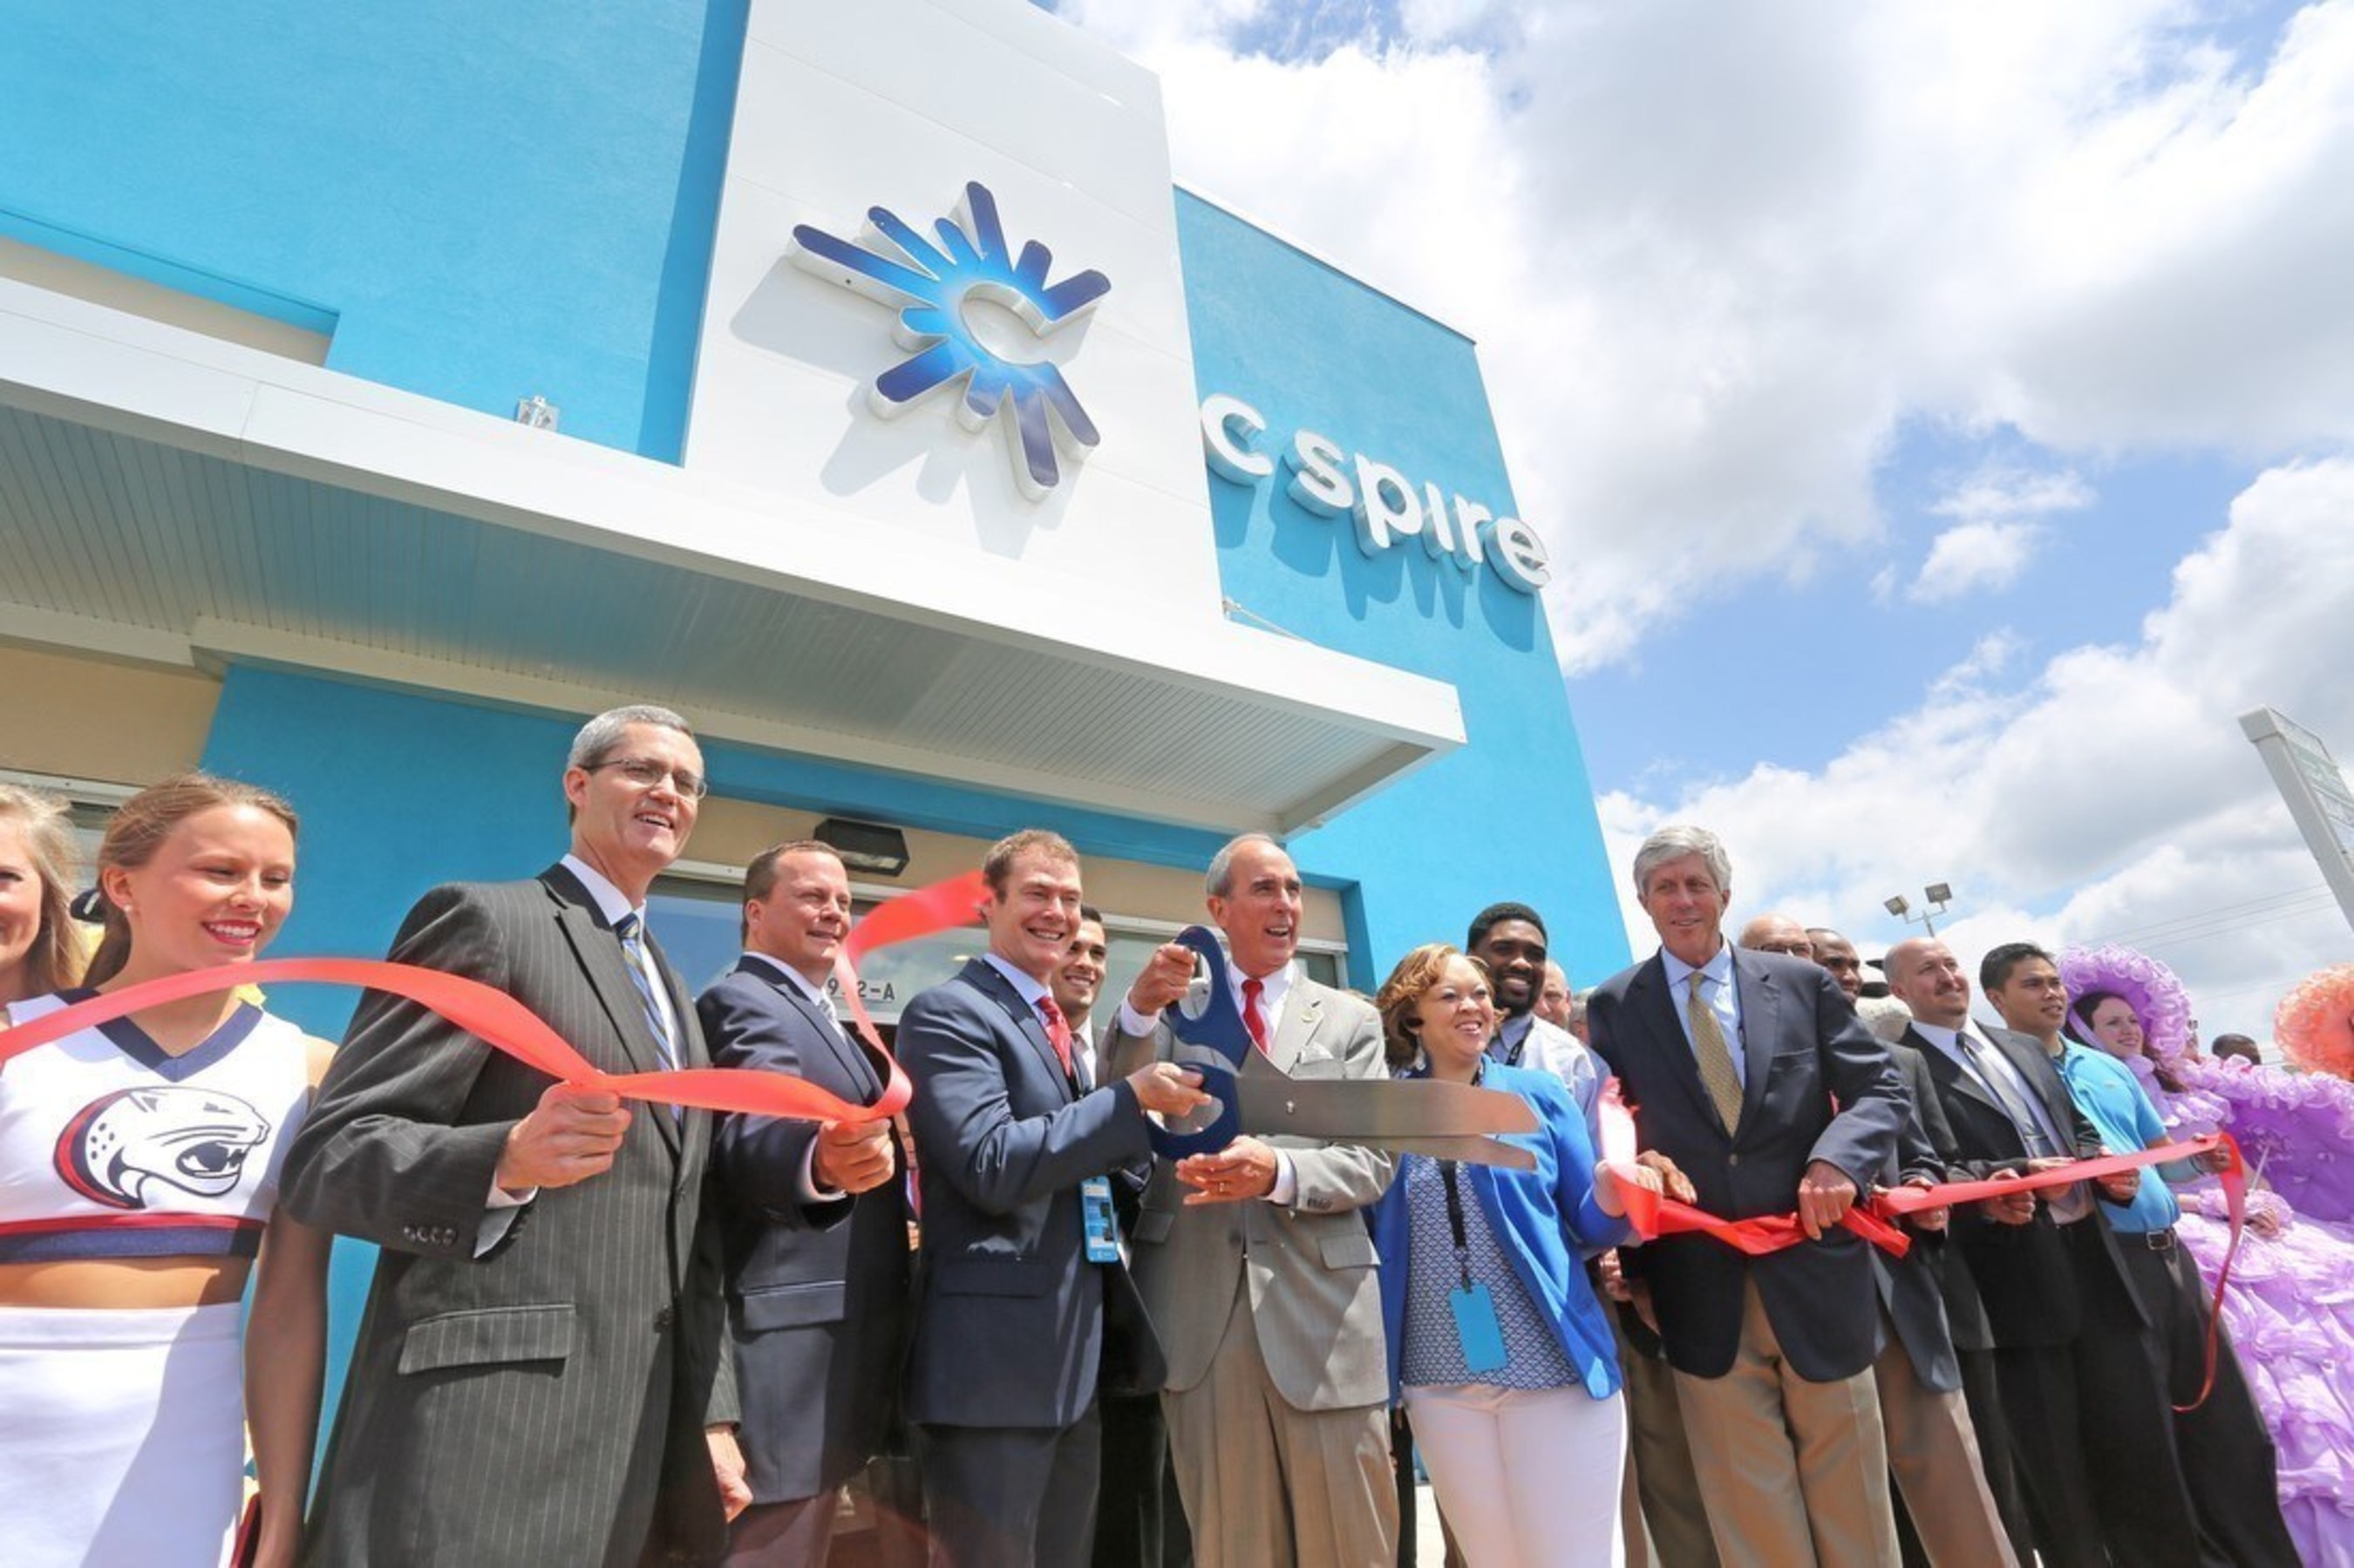 Local government officials, business executives and community leaders celebrated the grand opening Wednesday of C Spire's new customer experience retail shopping destination in Mobile, Alabama.  The 4,000 square foot store delivers an interactive shopping experience that mirrors how customers live, work and play and is expected to help the company move closer to its goal of becoming known as one of the nation's premiere retailers.